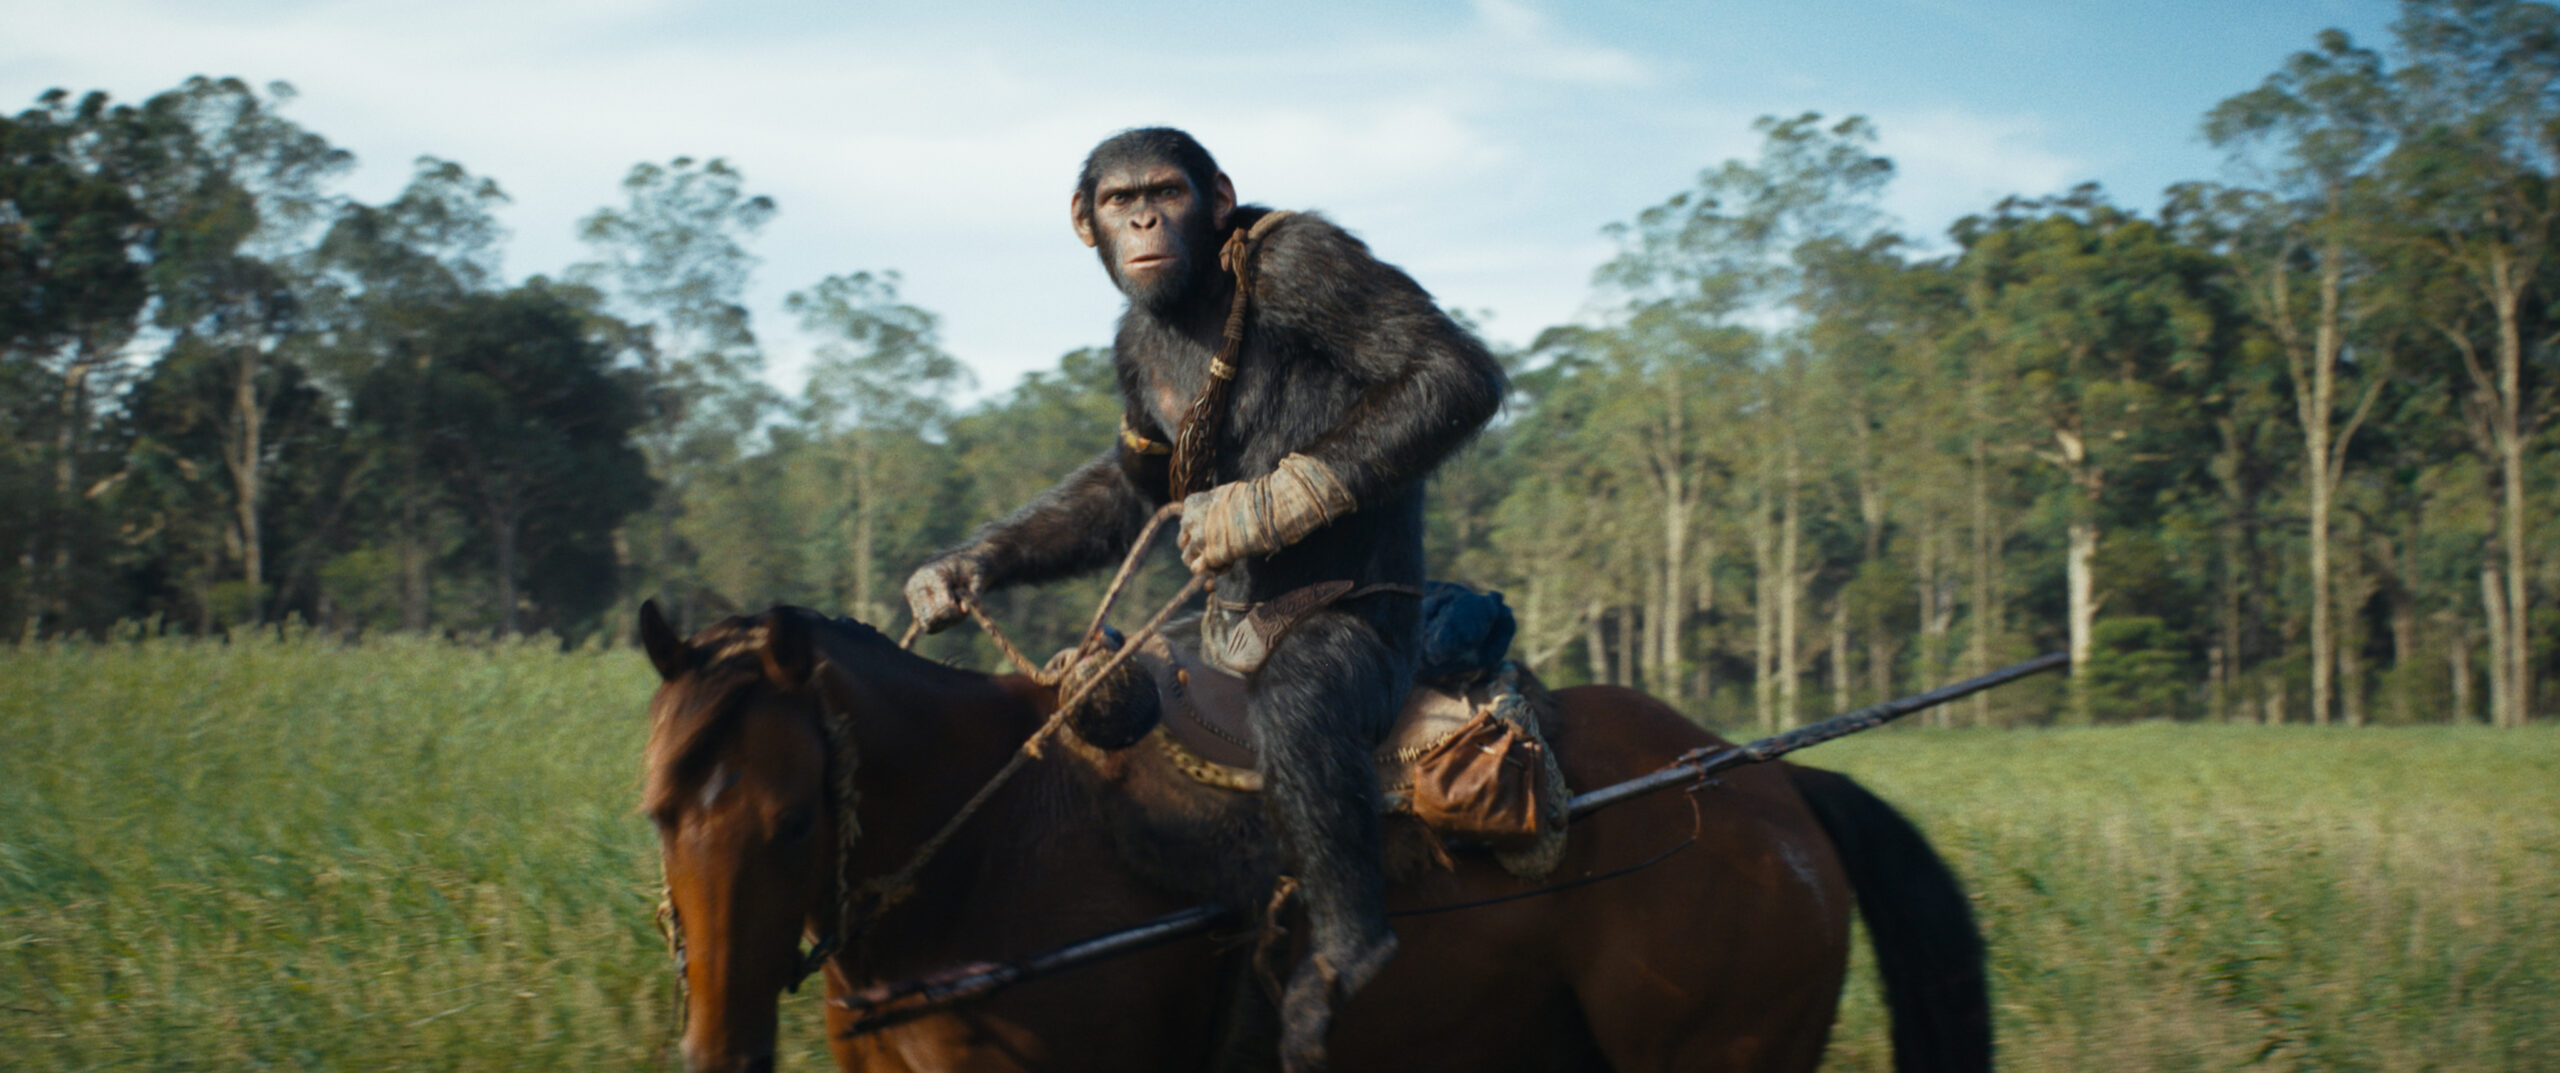 ‘Kingdom of the Planet of the Apes’ Hits PH Theaters May 8—Watch the Trailer Here!